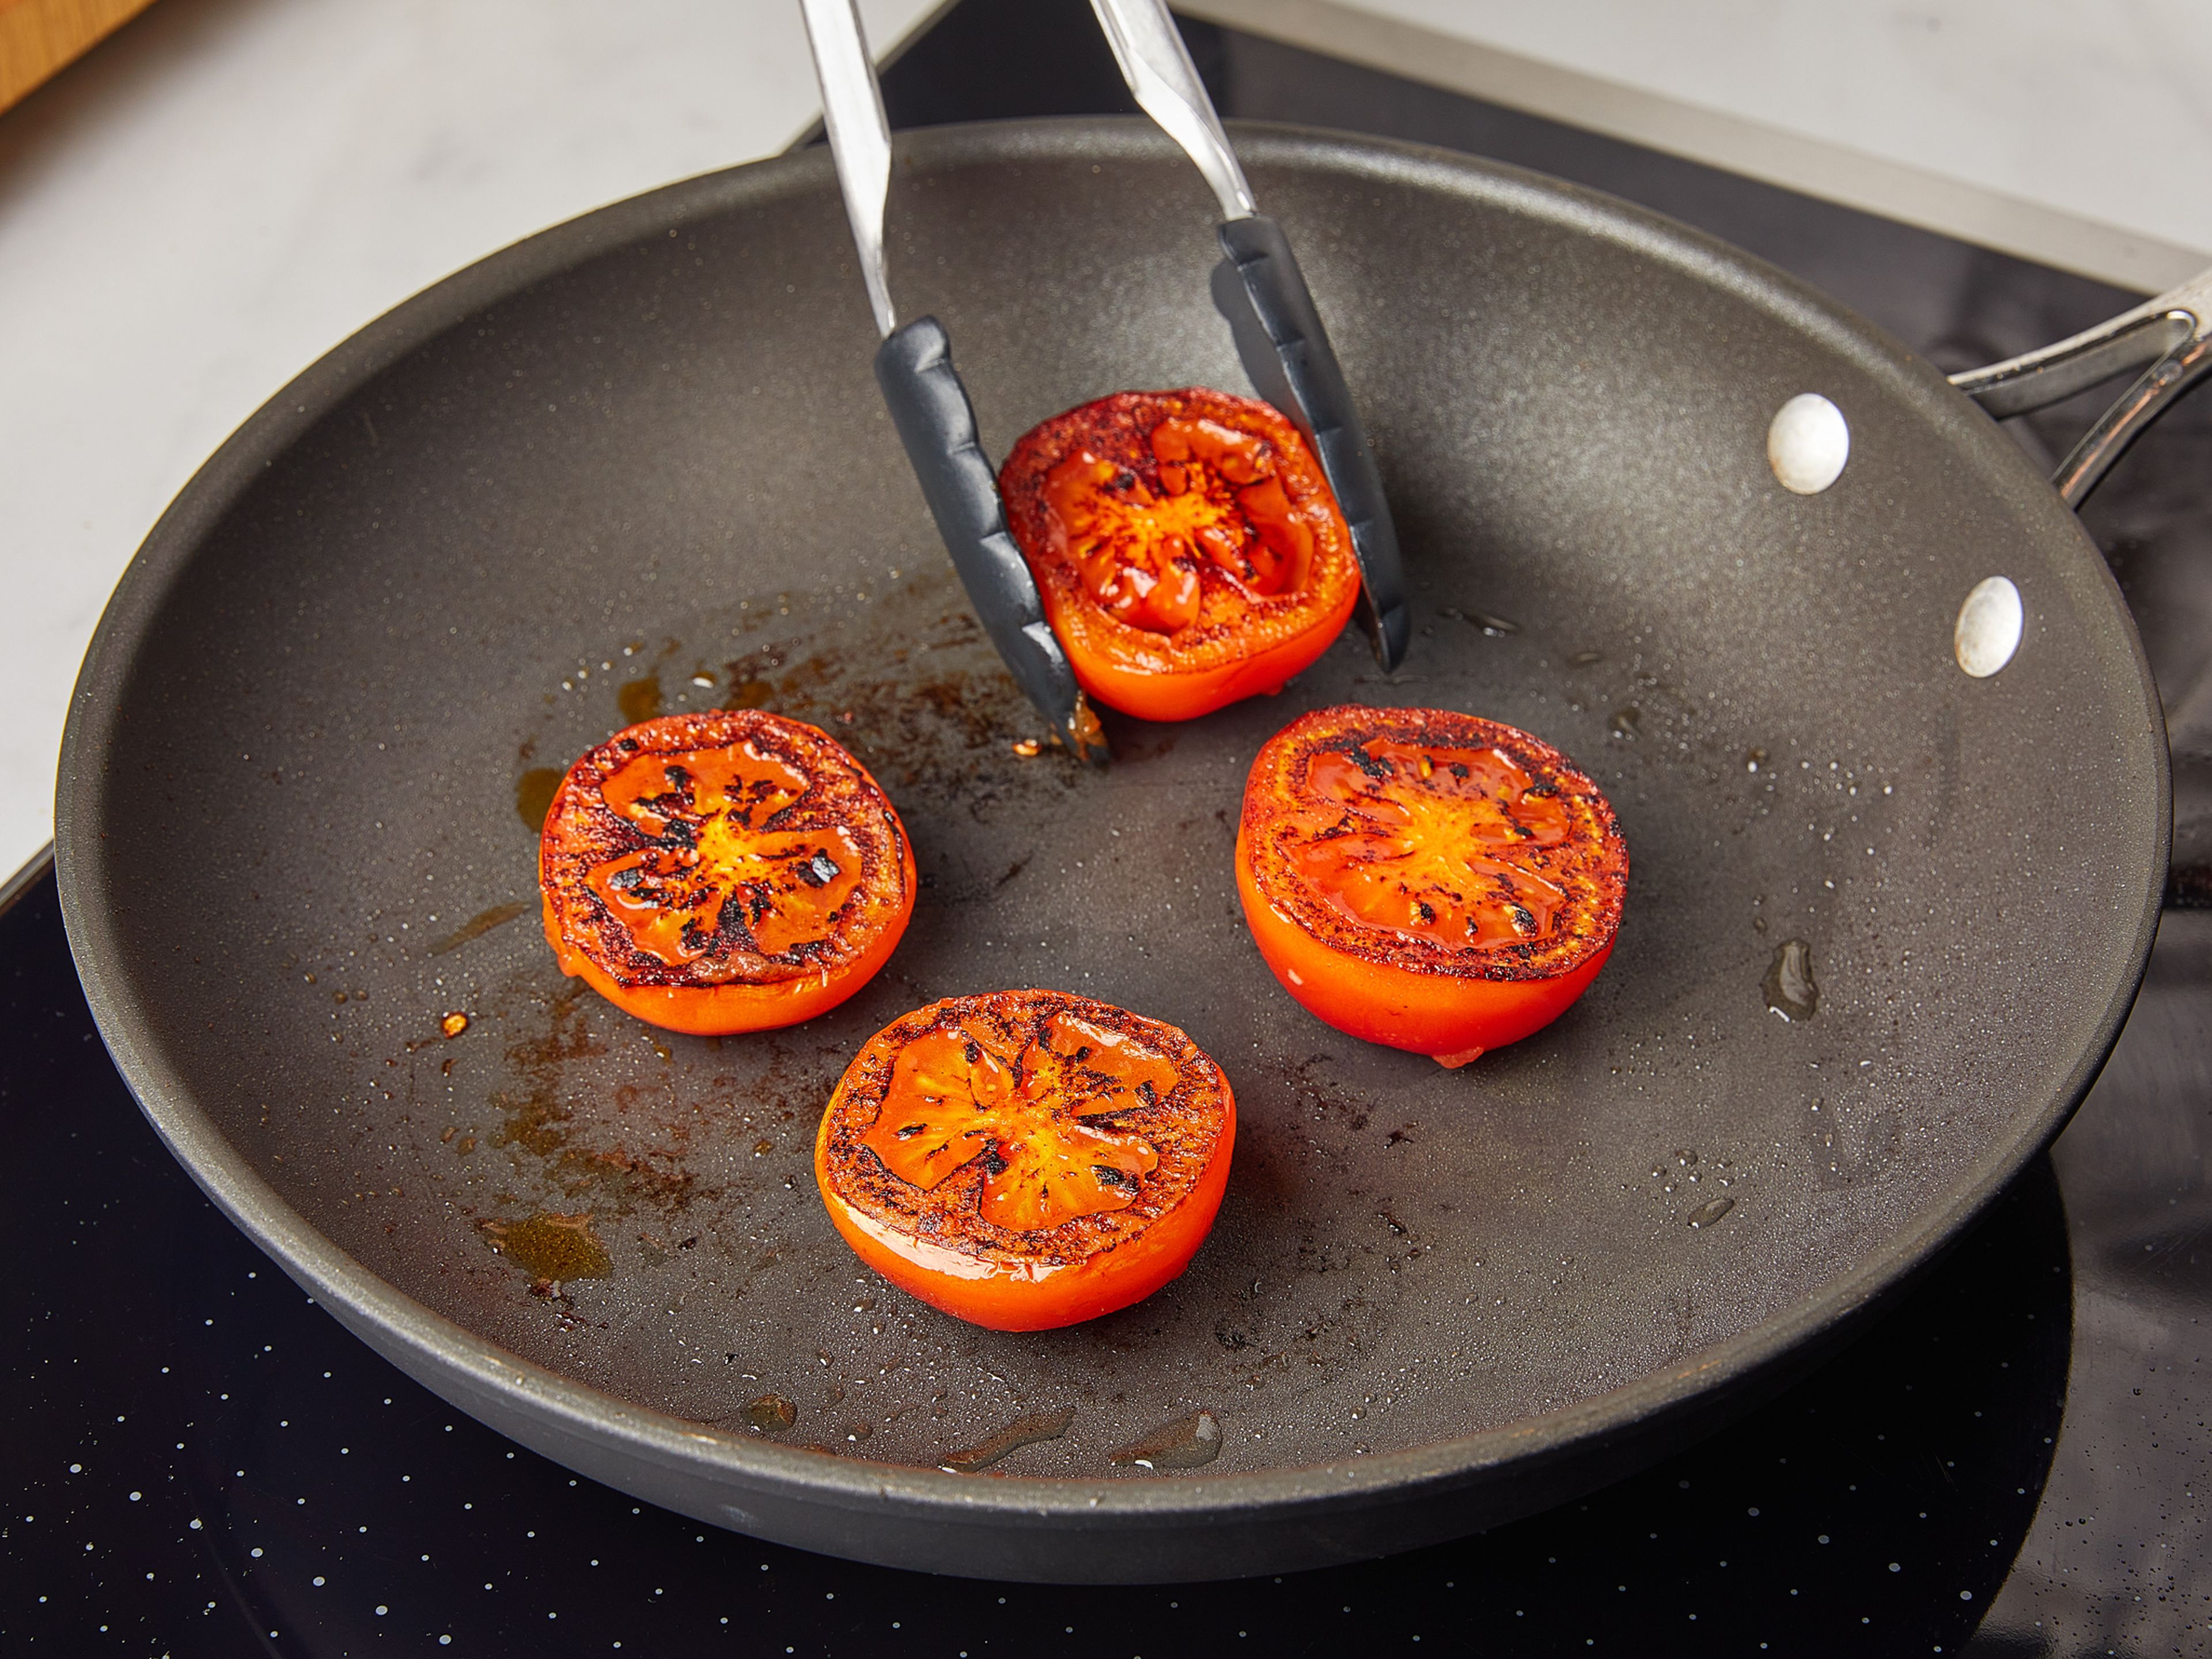 Heat oil again in the same pan and fry the tomatoes for approx. 3 min. on each side. Remove the tomato halves from the pan and add to the mushrooms in the oven and keep warm.